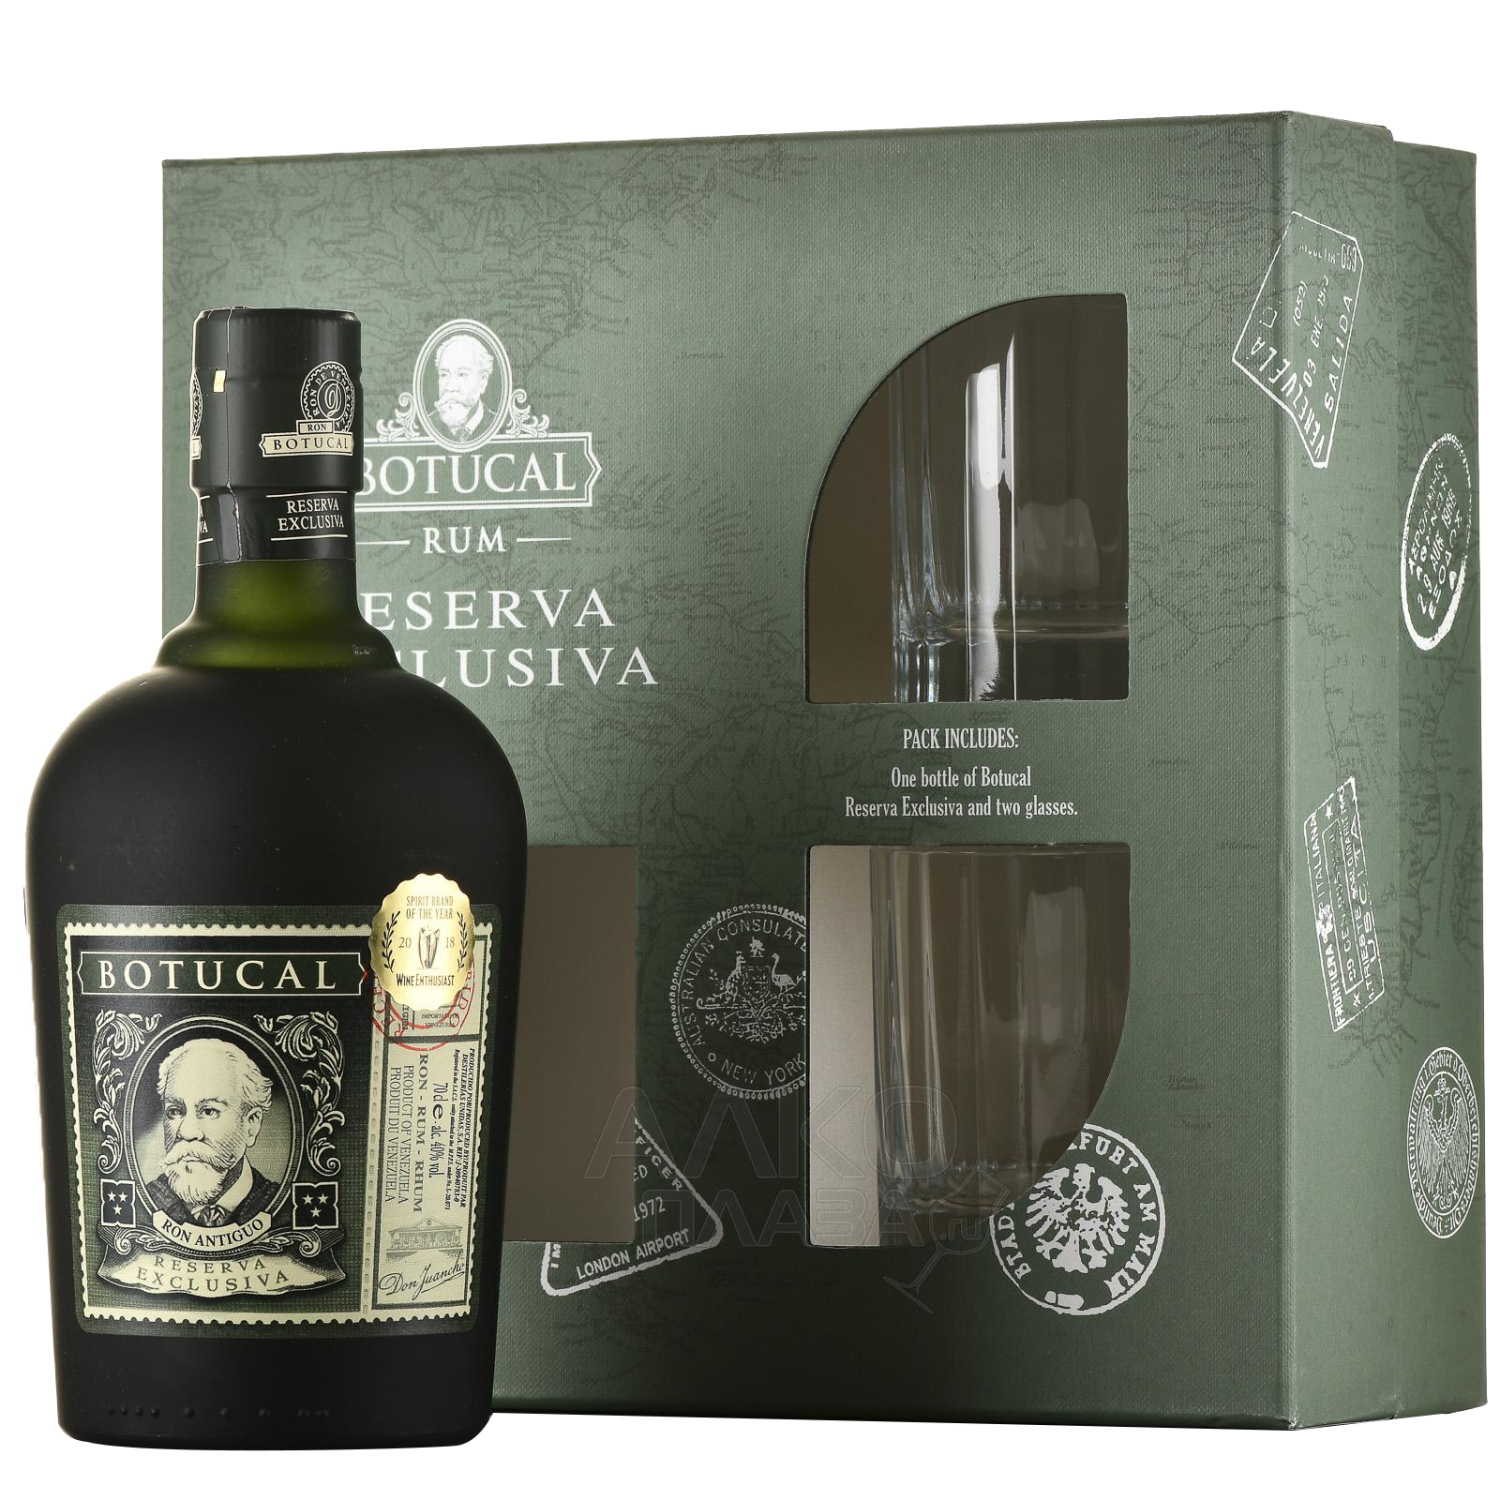 Botucal Reserva Exclusiva (gift box with 2 glasses) drappier andquot grande sendreeandquot gift box with 2 glasses